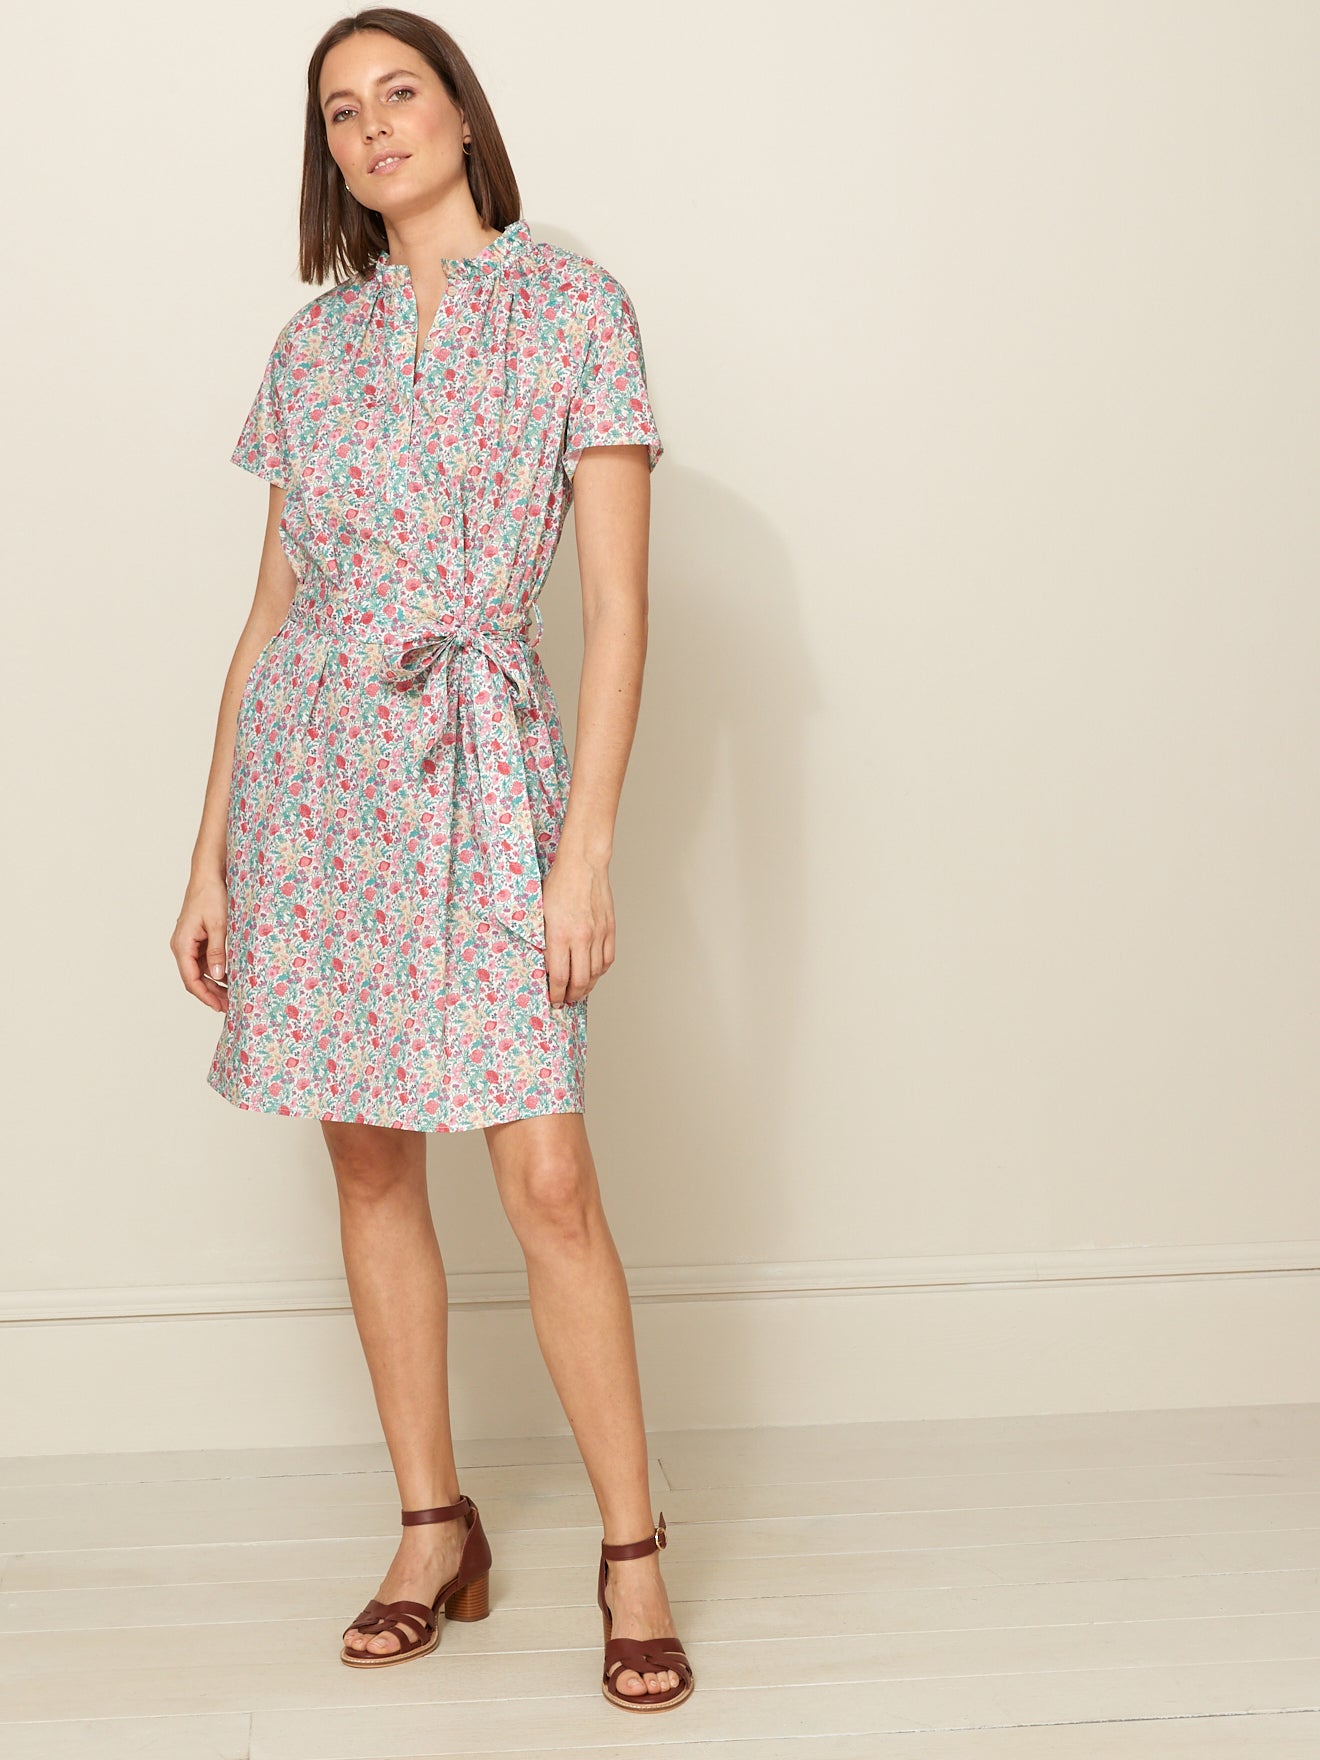 Robe courte femme - Tissu Liberty Florence May